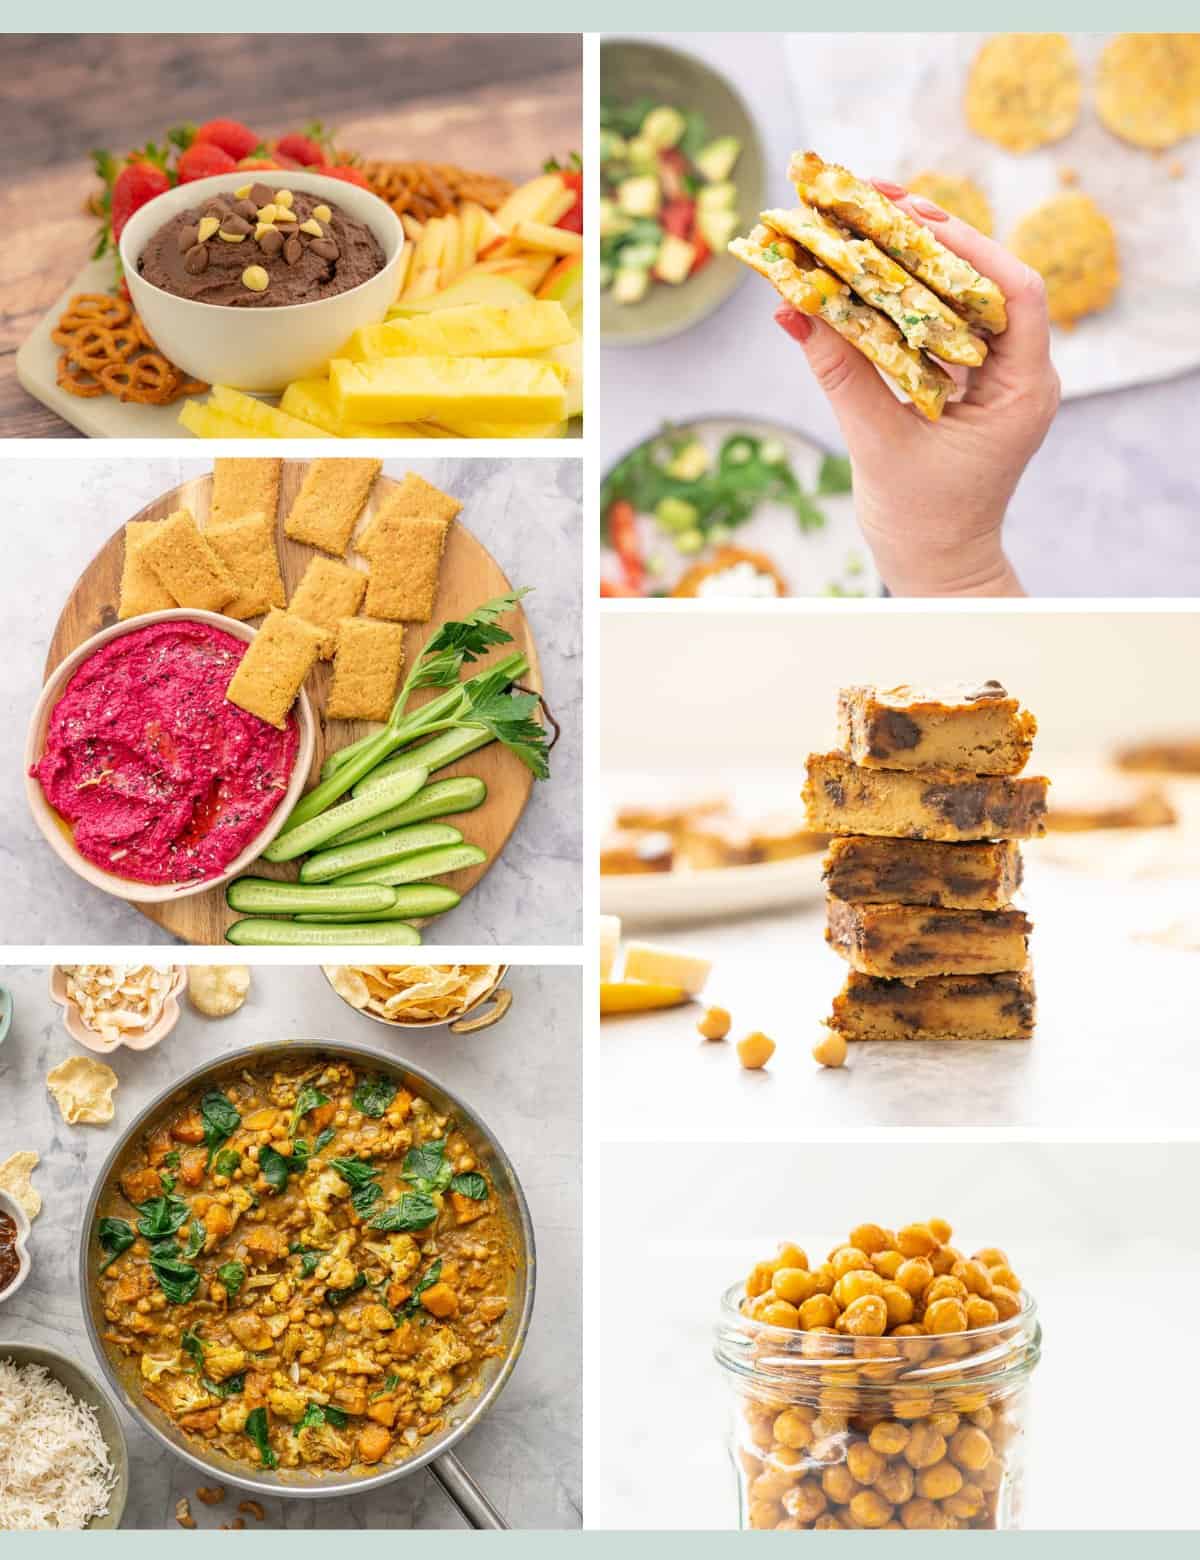 Chickpea Recipes Your Kids Might Eat